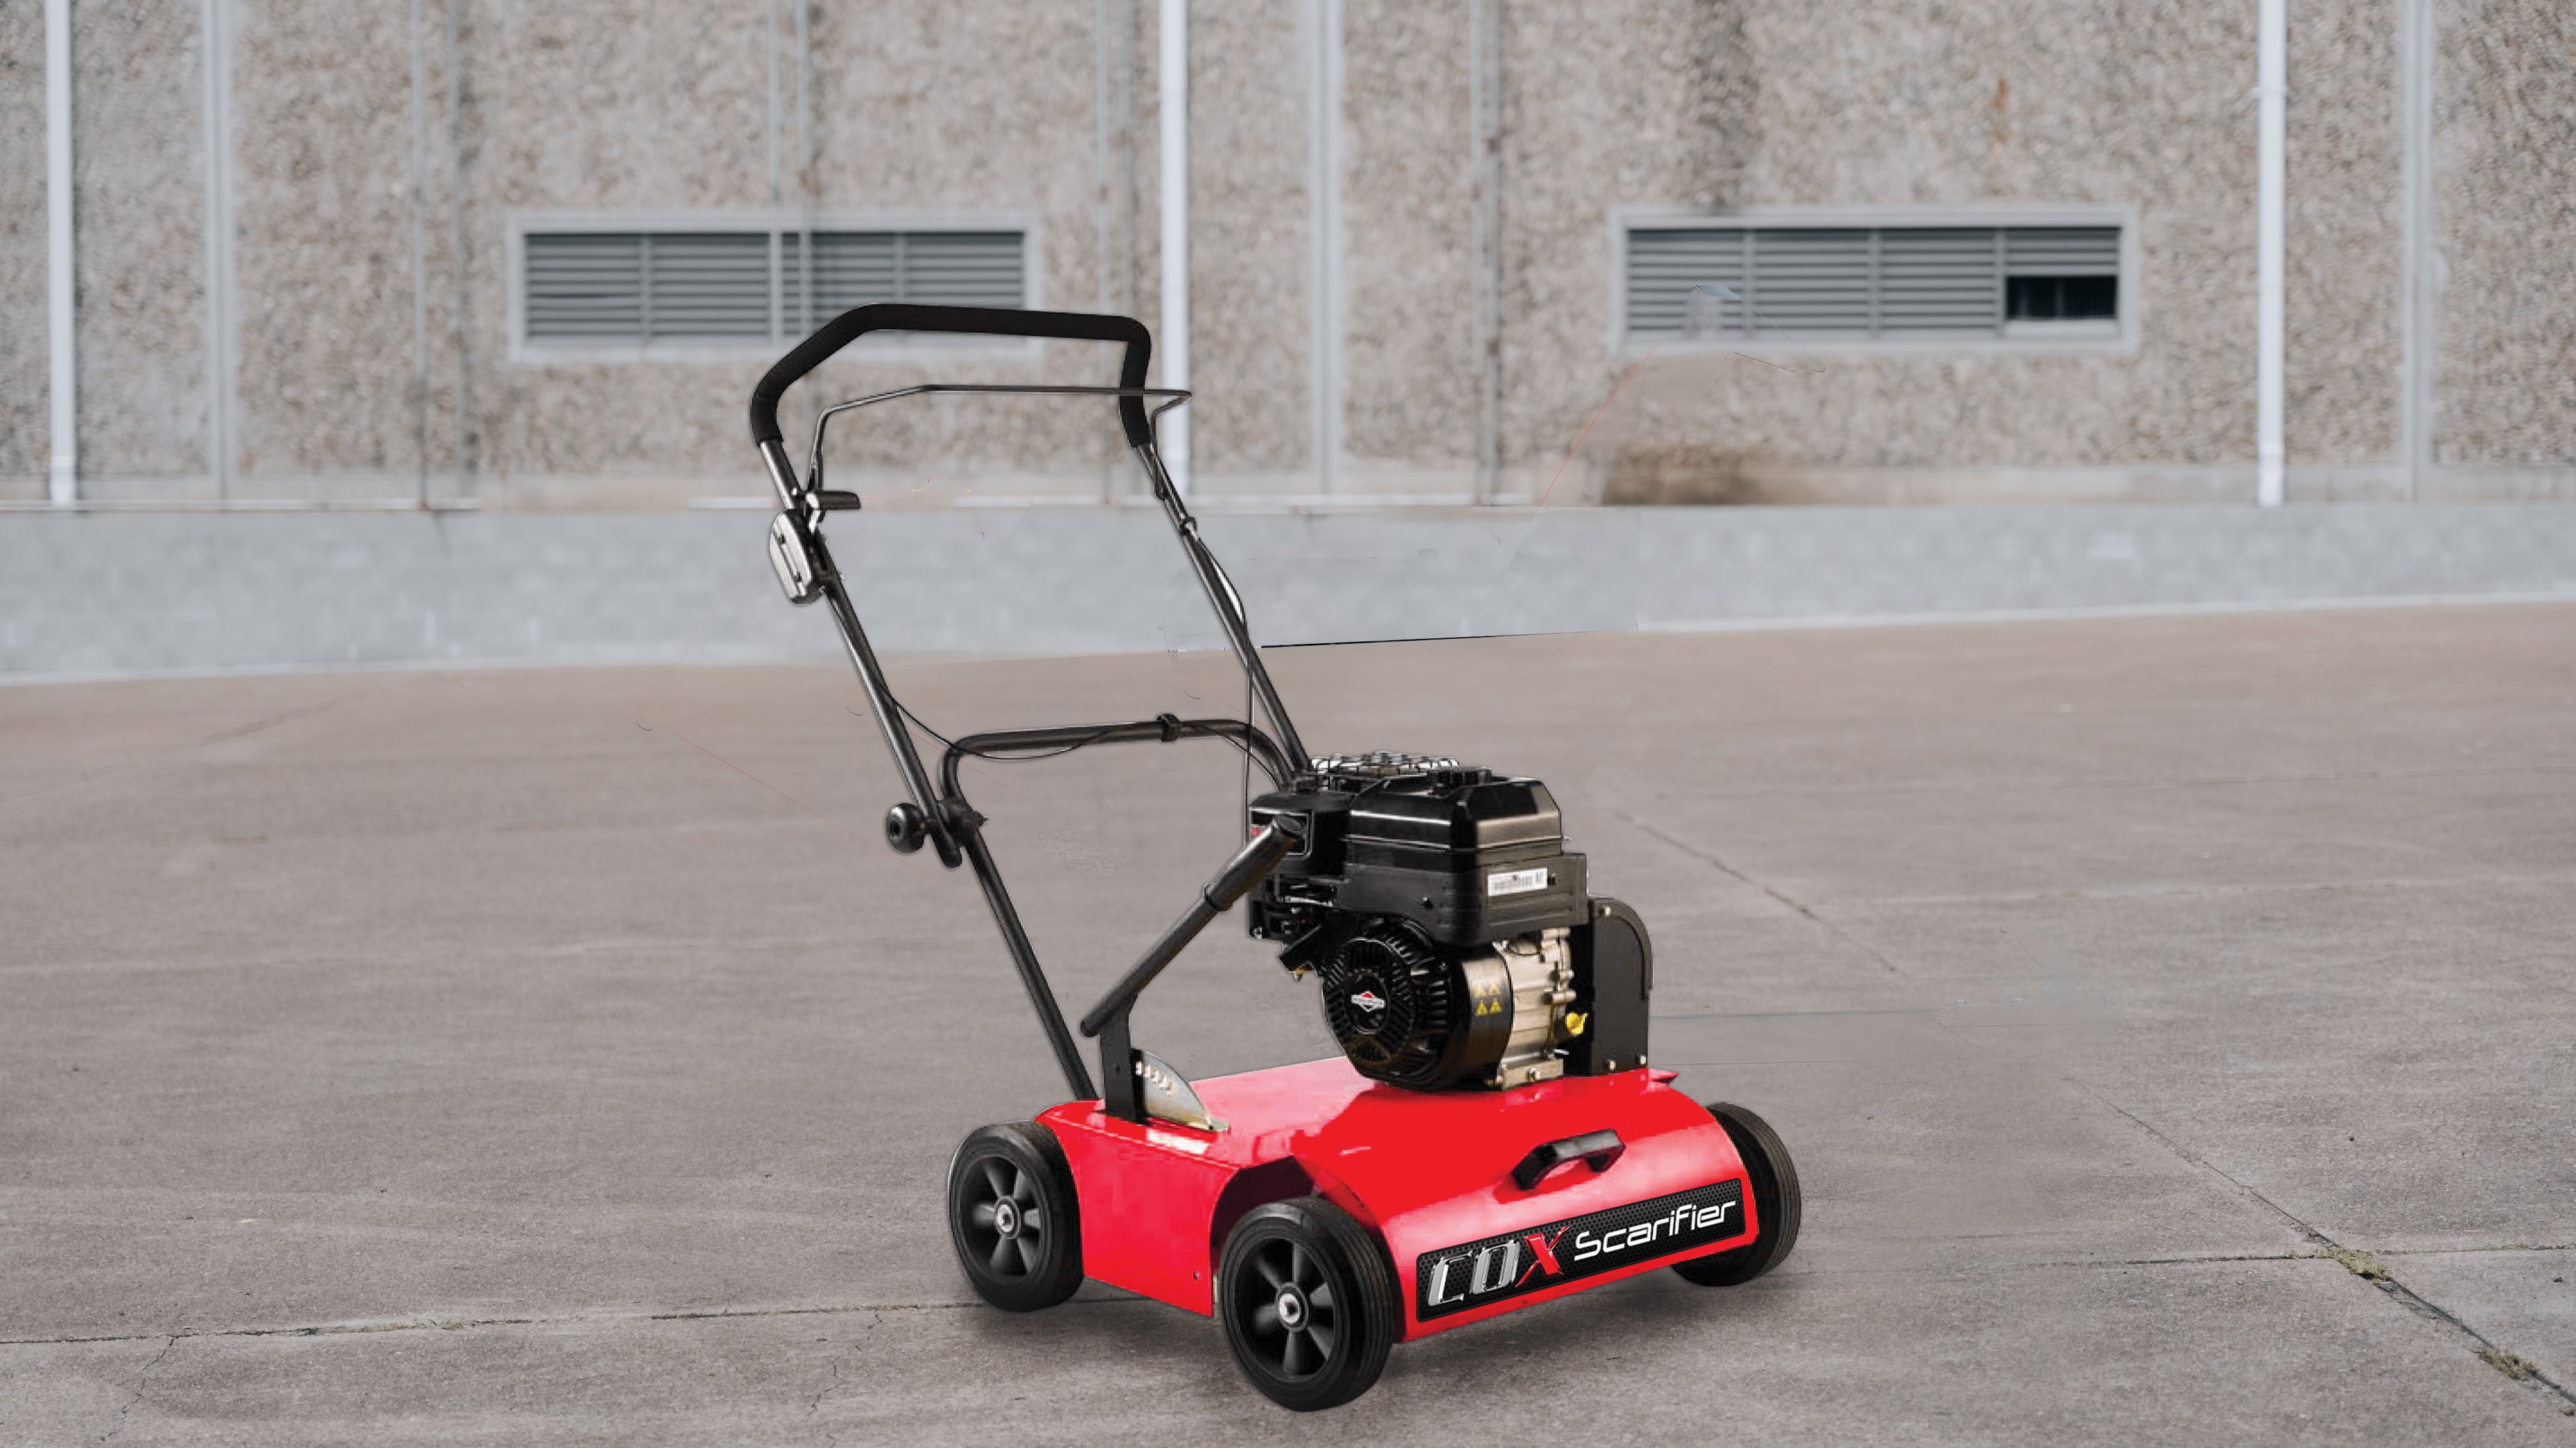 Photo of COX Mowers Scarifier on a concreted area with building in the background